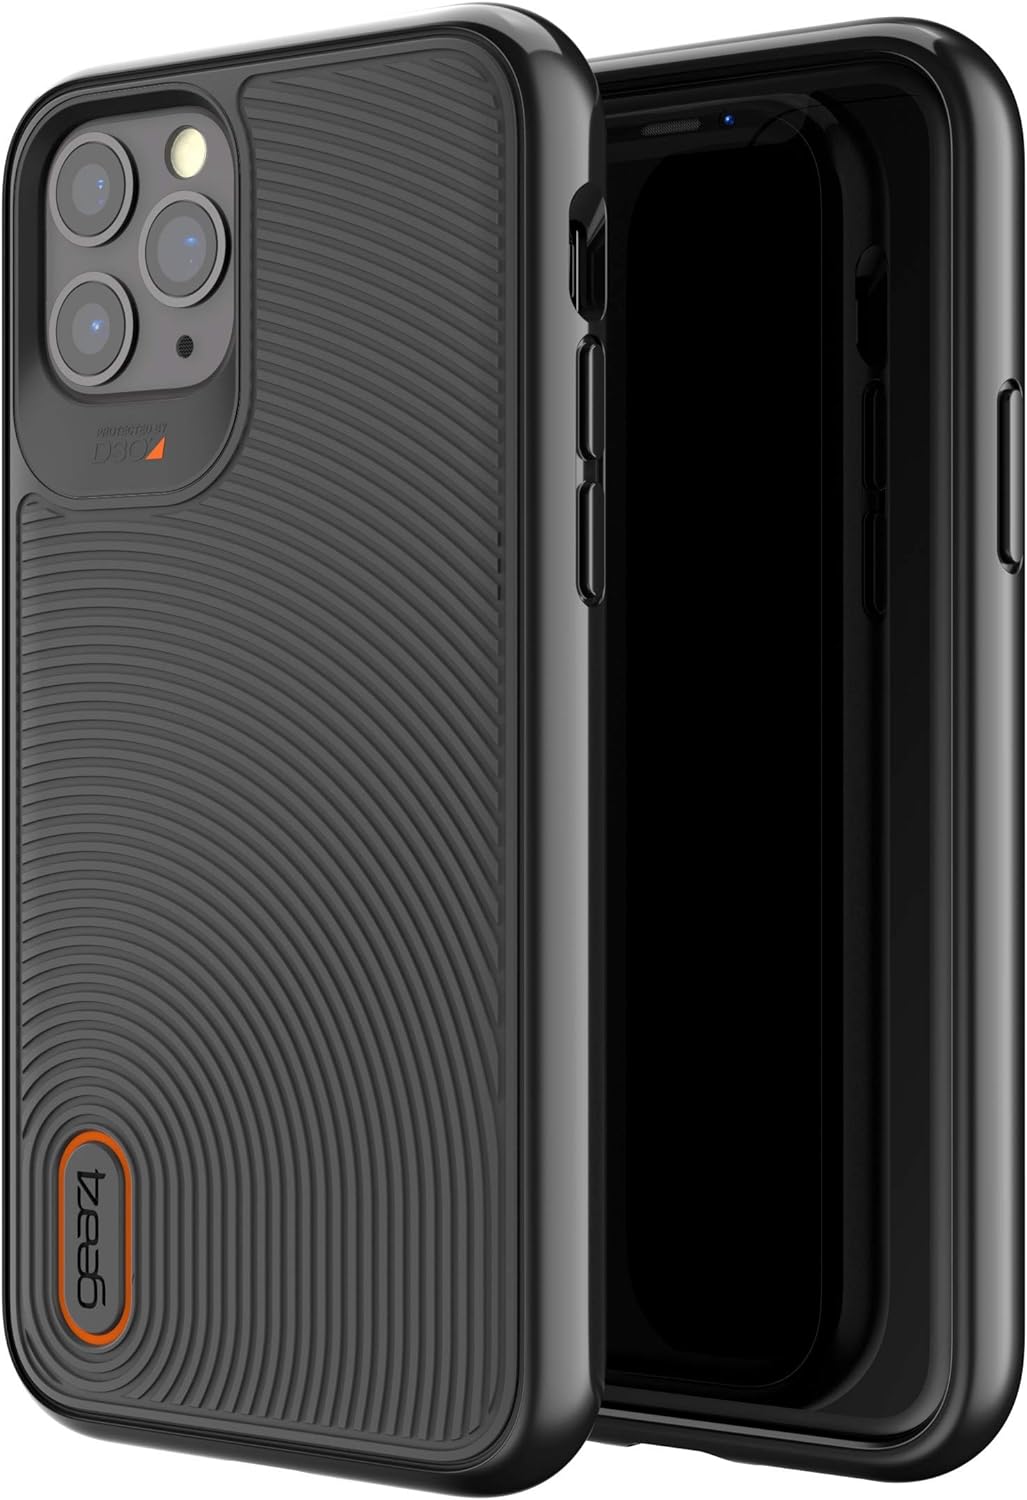 Gear4 Battersea Case for Apple iPhone 11 Pro 5.8", Advanced Impact Protection - Black